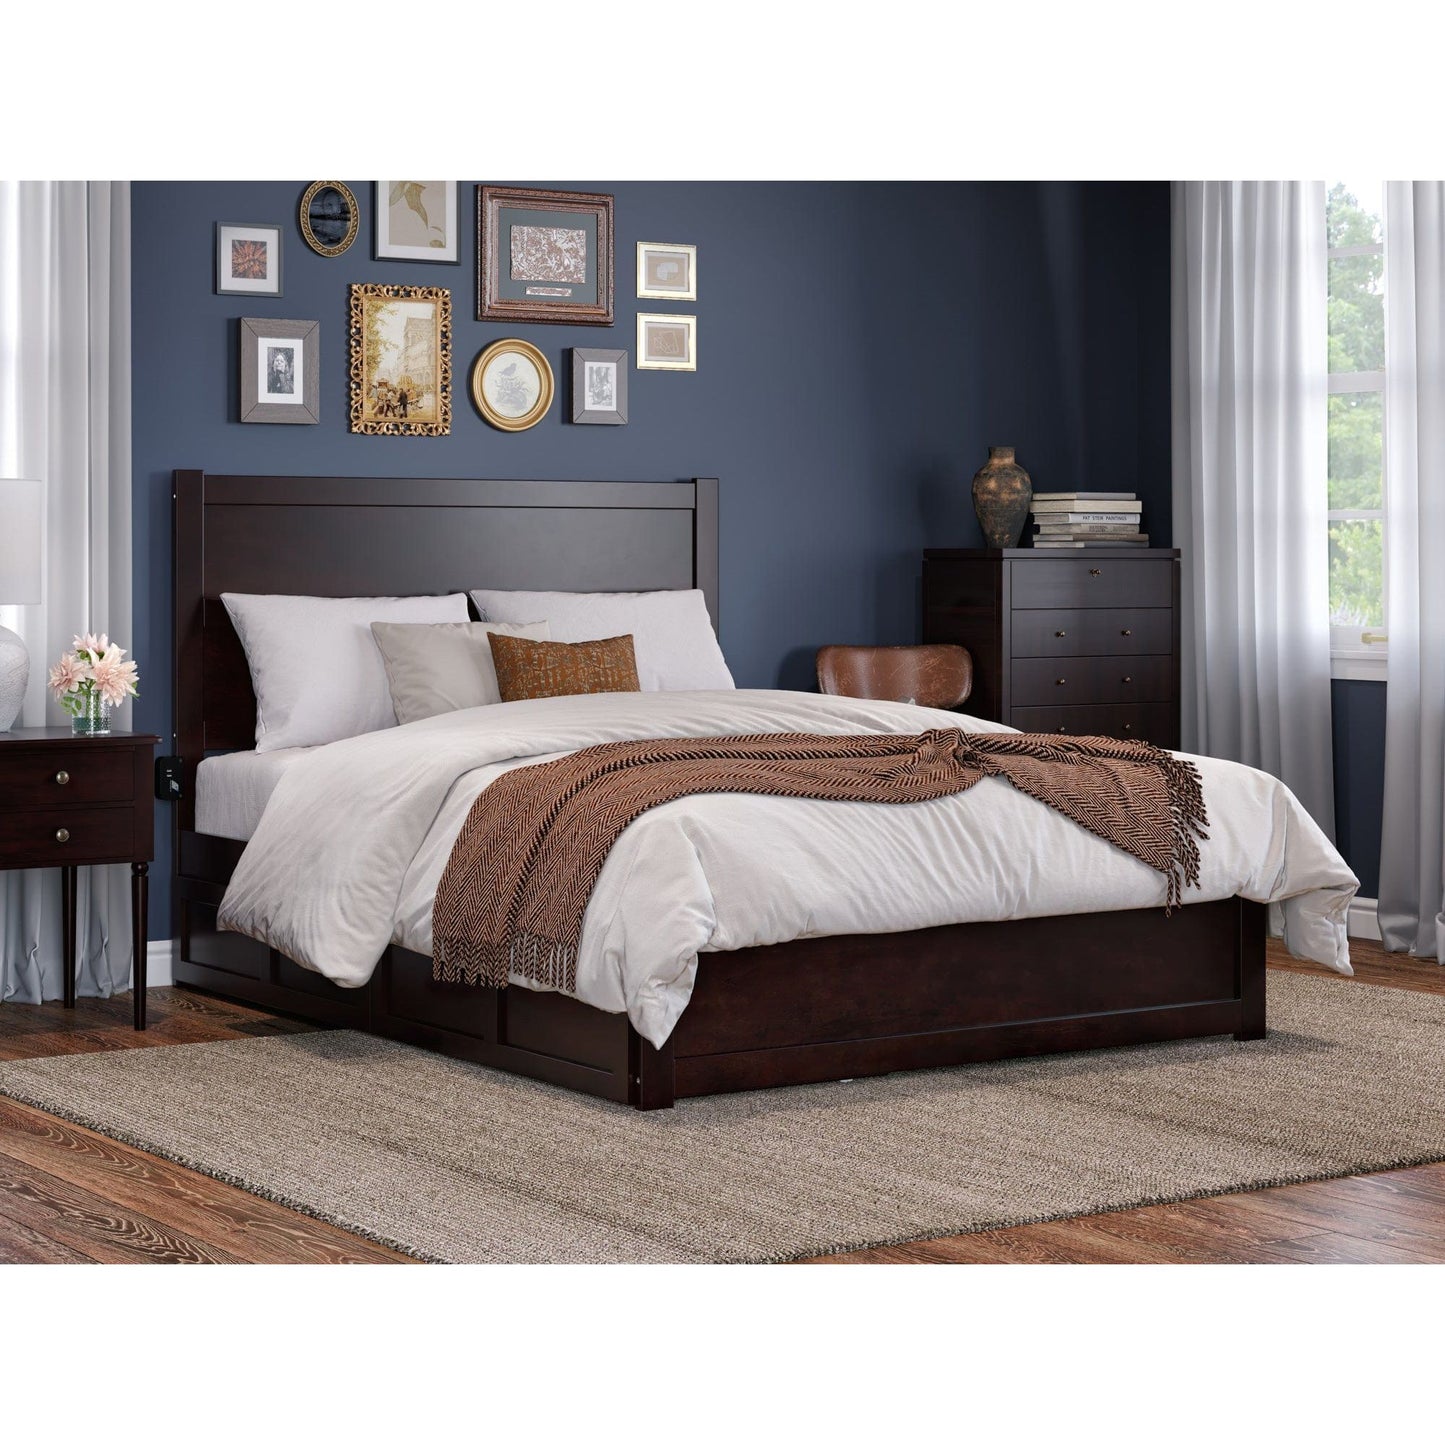 AFI Furnishings NoHo Queen Bed with Footboard and 2 Drawers in Espresso